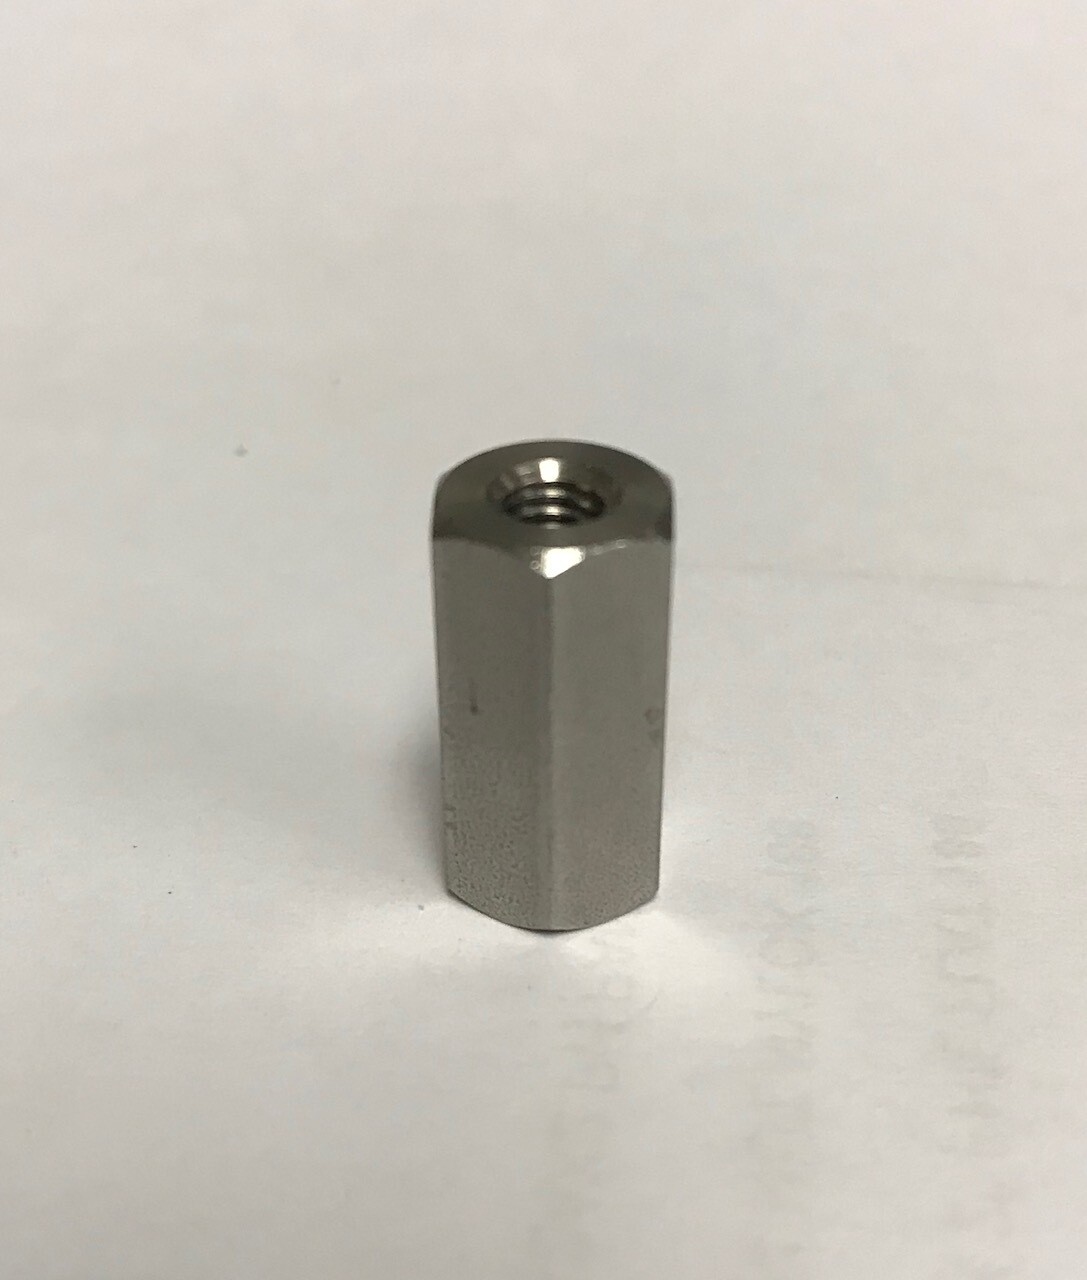 Track hex barrel nut for confined spaces